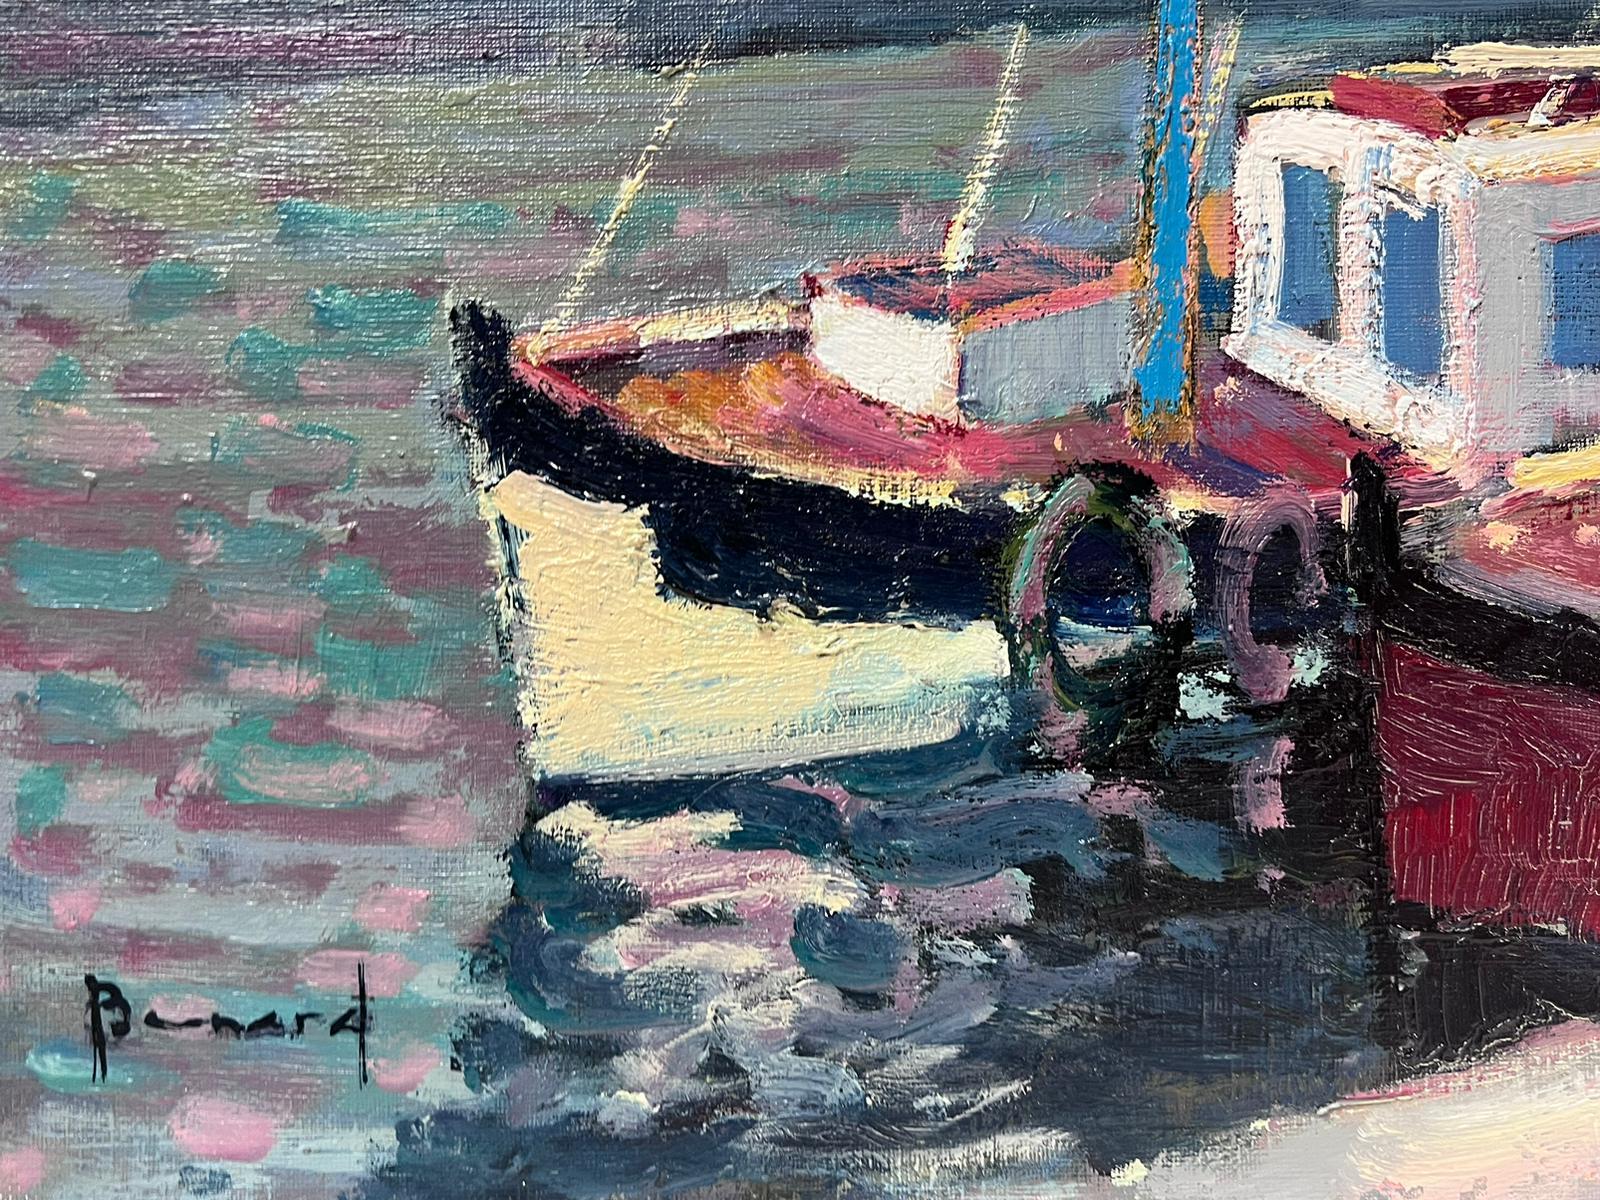 Artist/ School: Guy Benard (French b.1928) signed lower corner. Painter from Rouen, Normandy, exhibited throughout France. 

Title: Honfleur Harbour

Medium: signed oil on canvas, unframed and inscribed verso

size: 18 x 24 inches

Provenance: